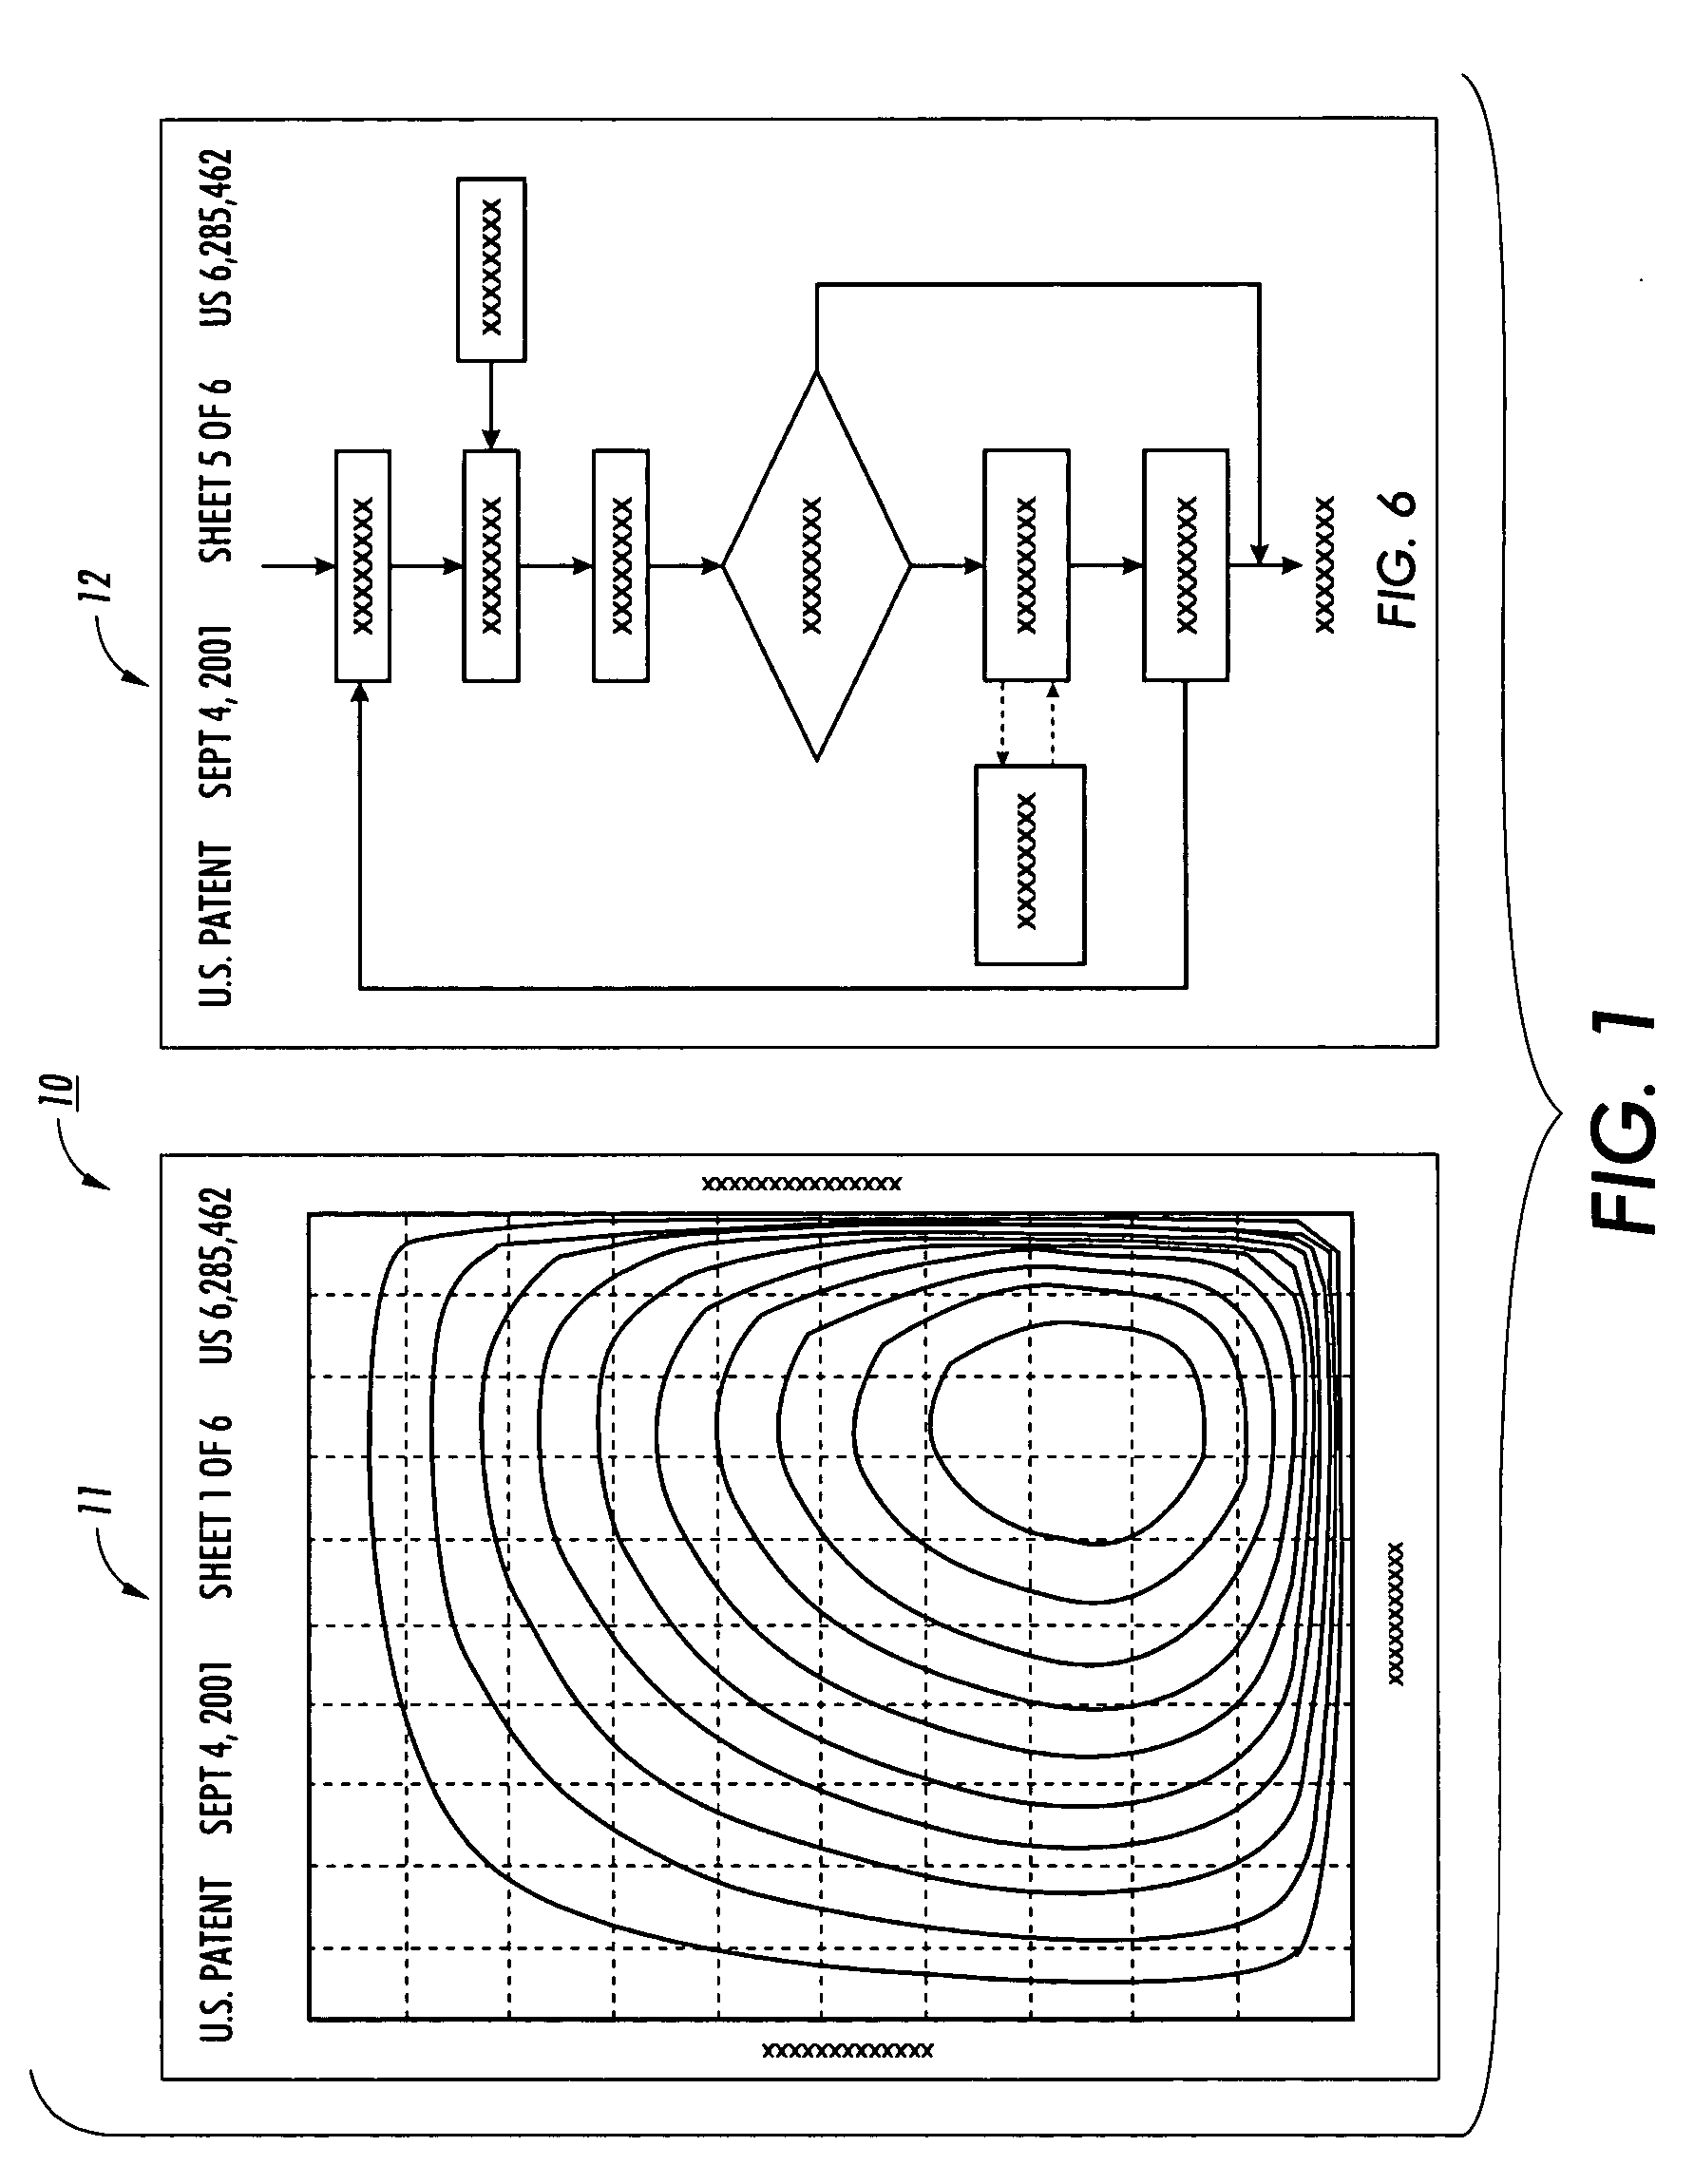 Client dependent image processing for browser-based image document viewer for handheld client devices